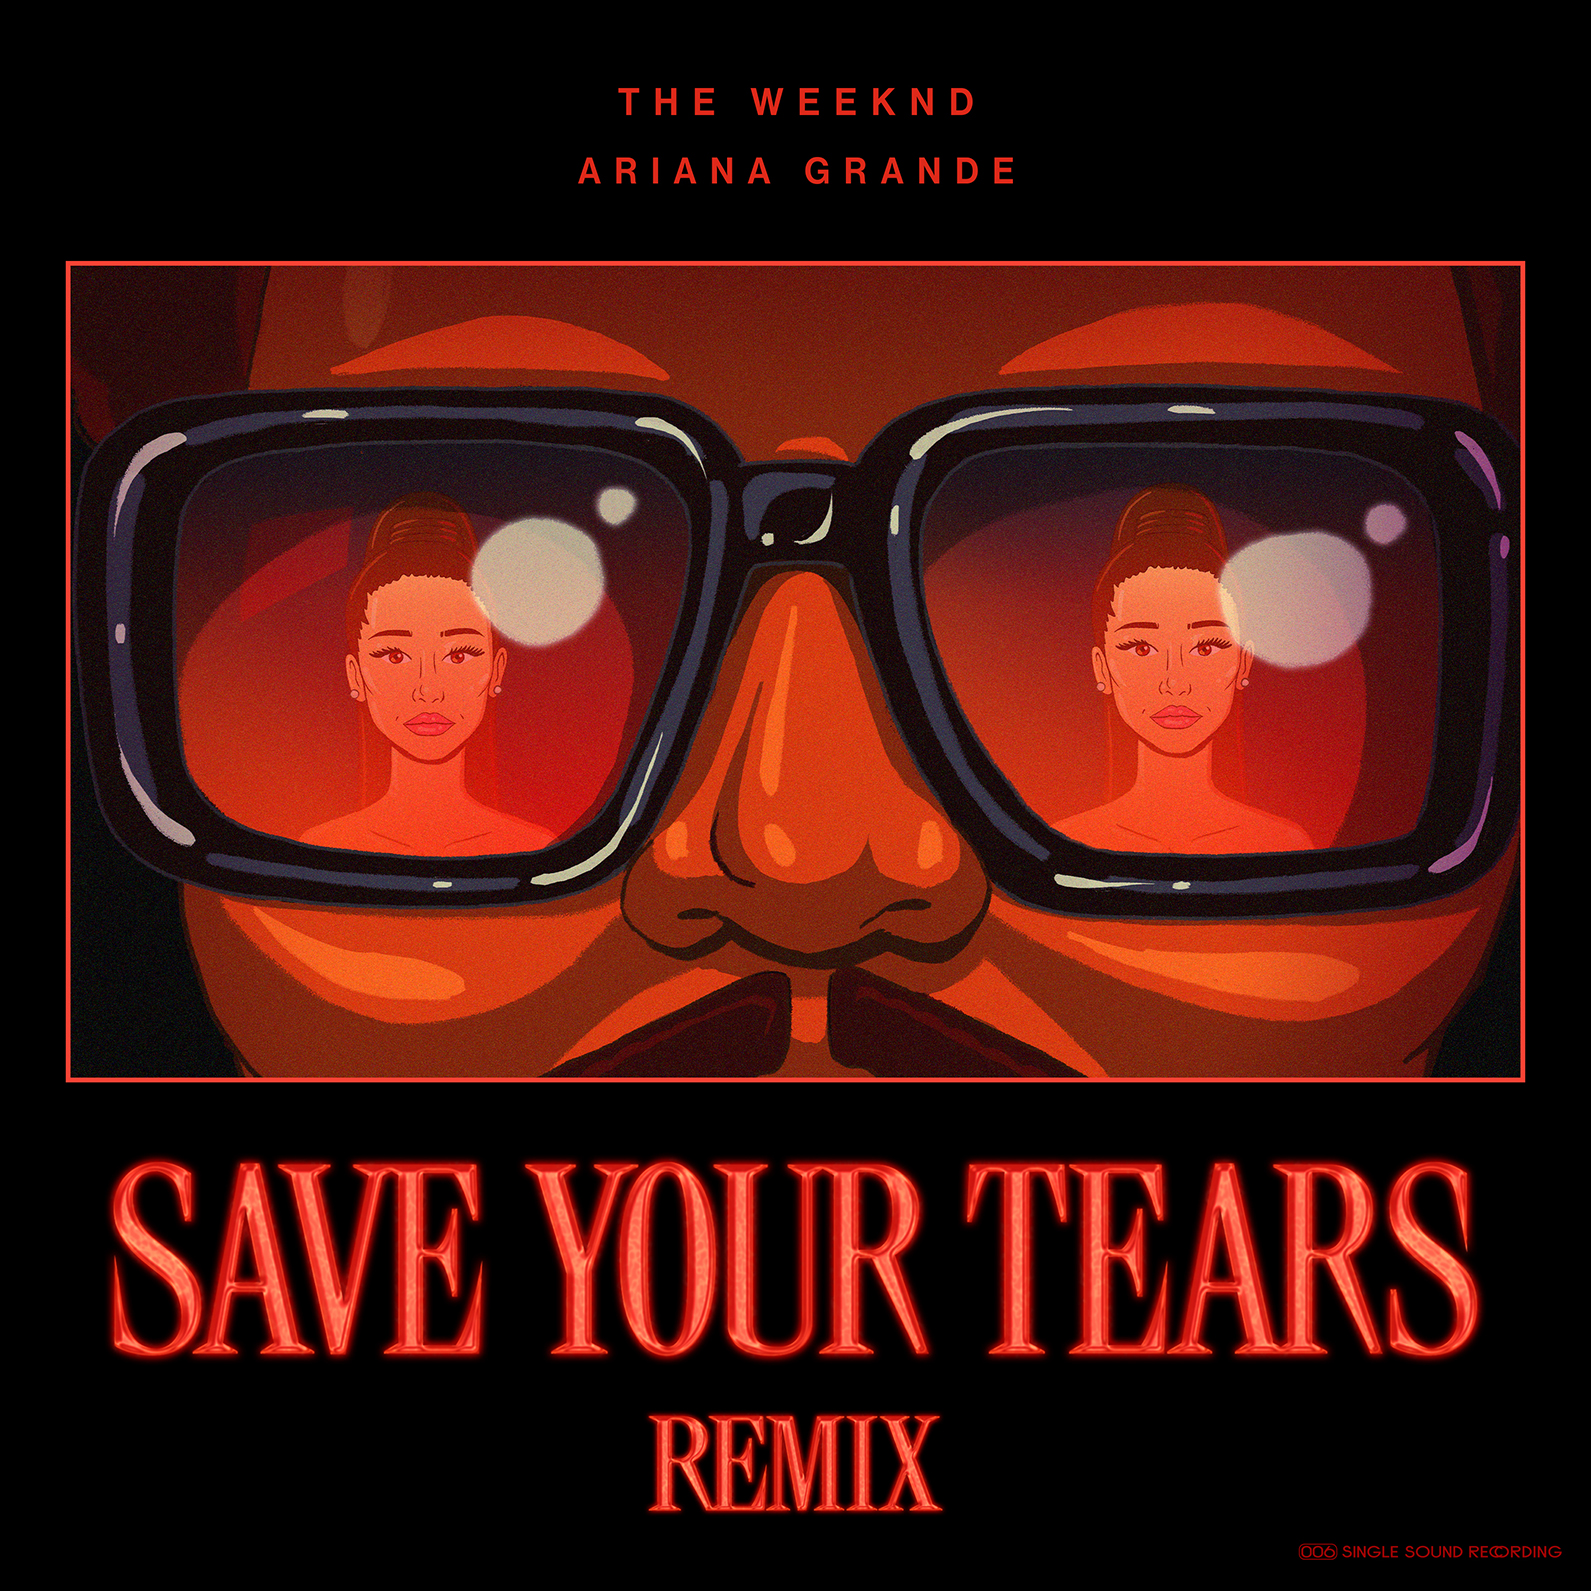 THE WEEKND shares 'Save Your Tears Remix' video featuring Ariana Grande 